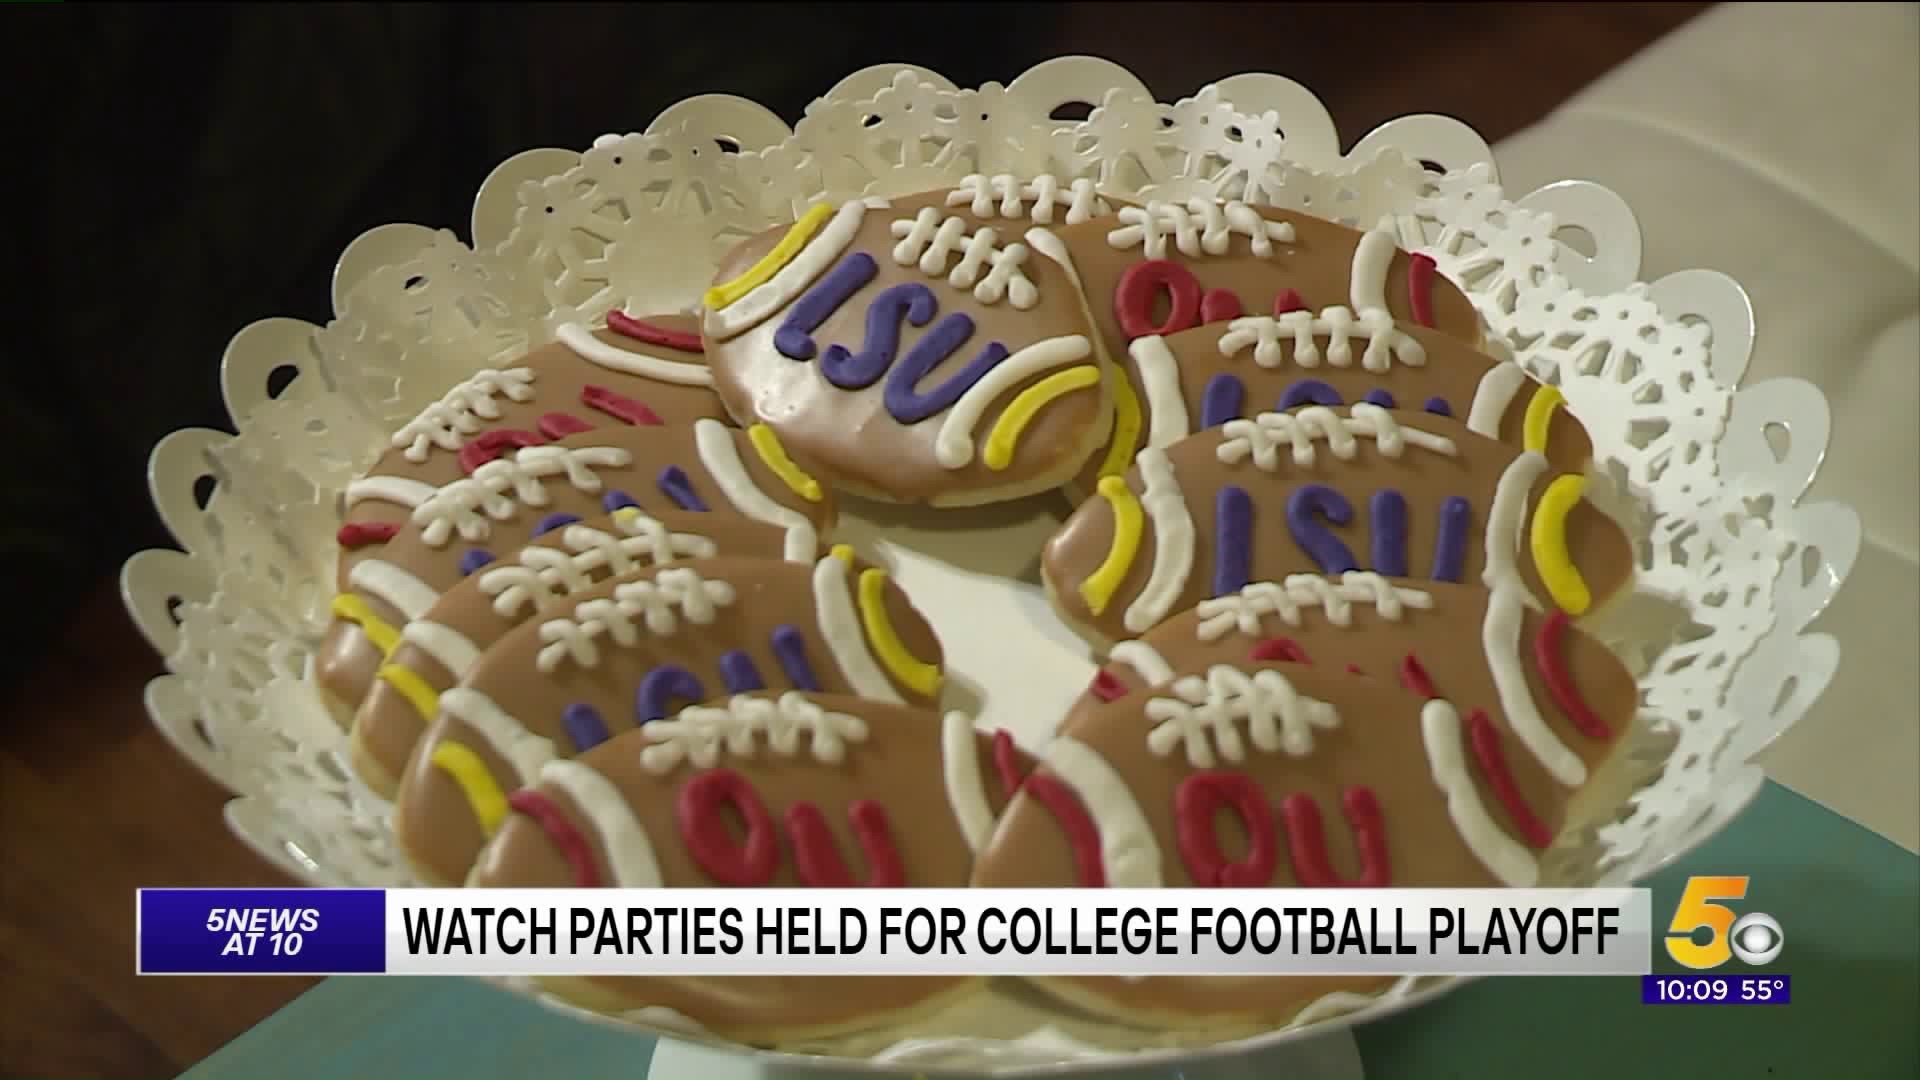 Friends In Fort Smith Gather To Celebrate Hometown Teams Playing In CFB Playoff